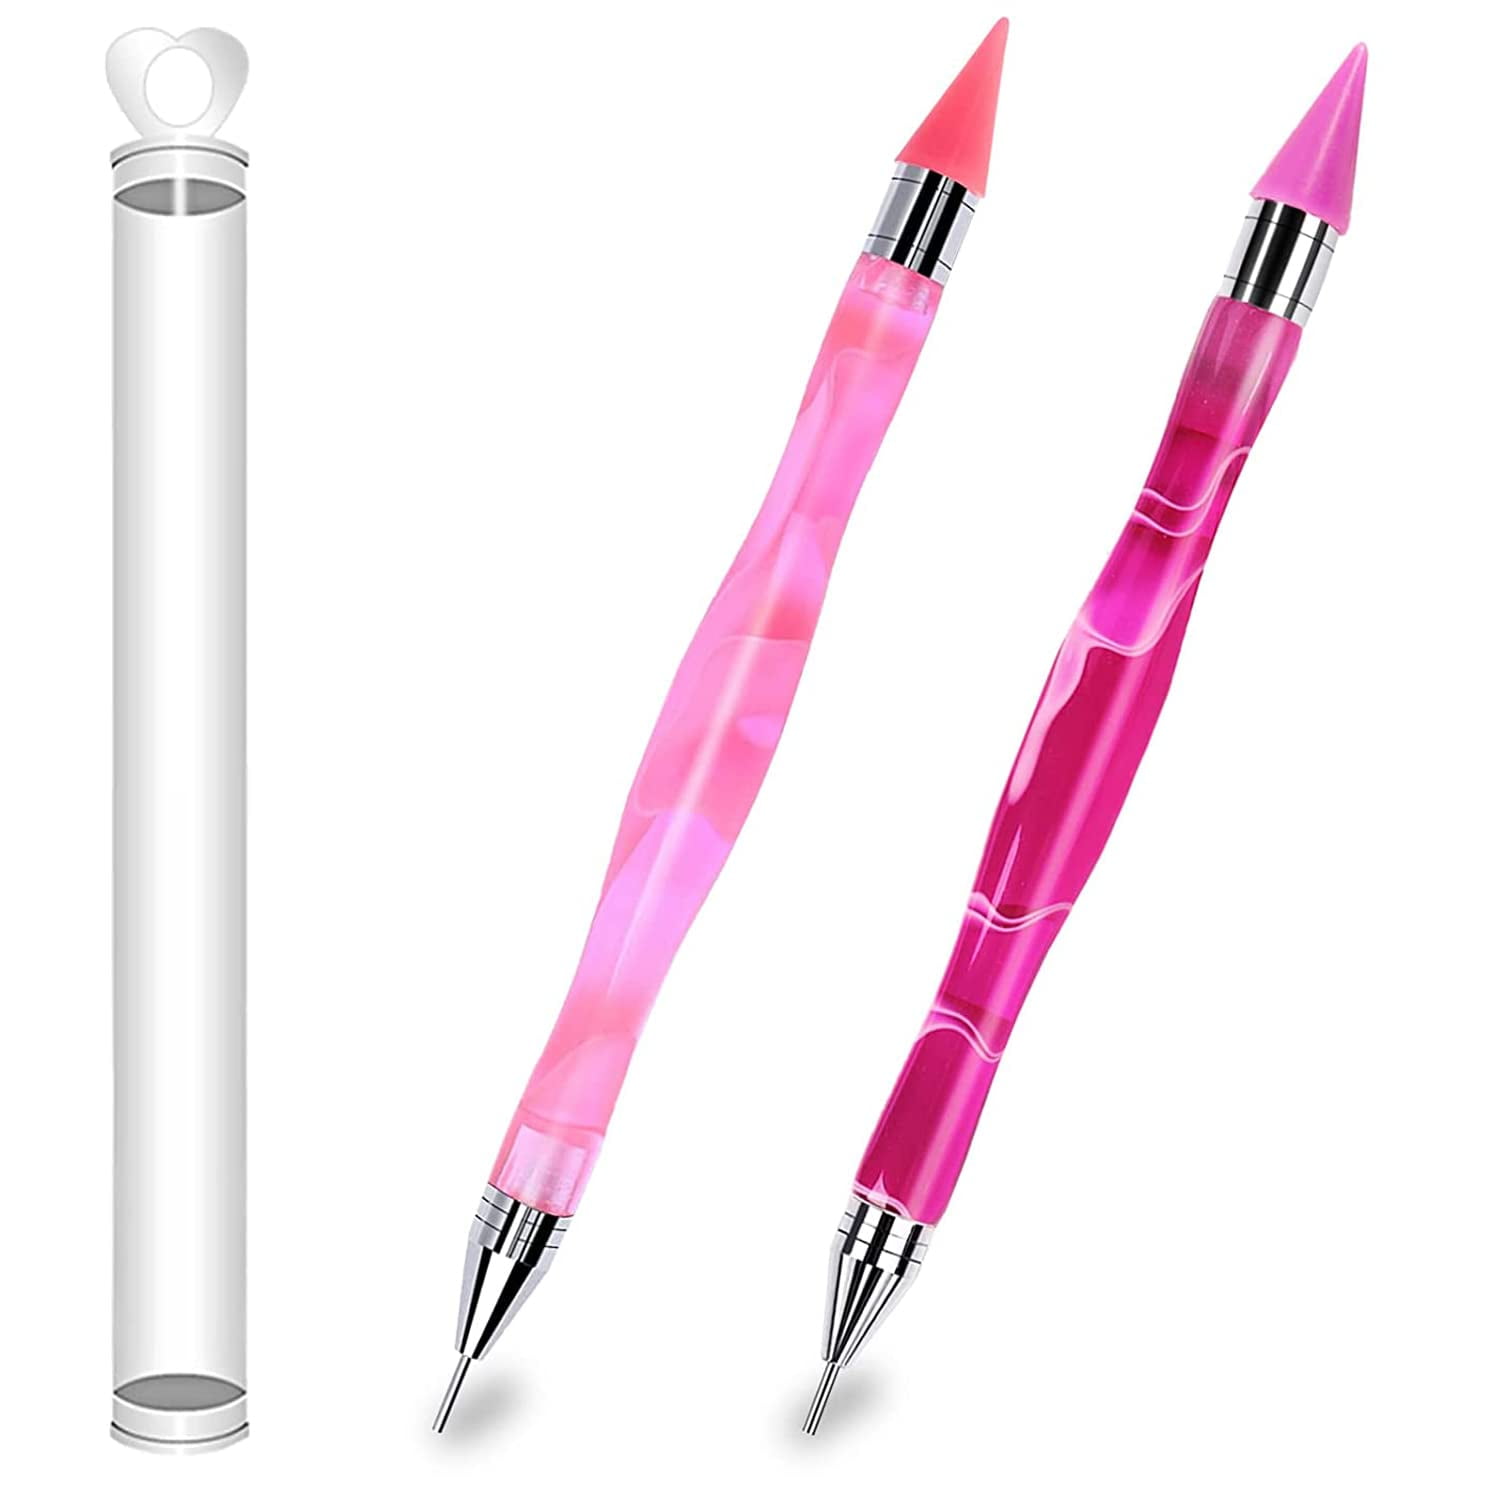 Refillable Diamond Painting Wax Drill Dot Pen for Rhinestones, Bead Embroidery, and Nail Crafting – Compatible with Round or Square Drill Gem Dots –